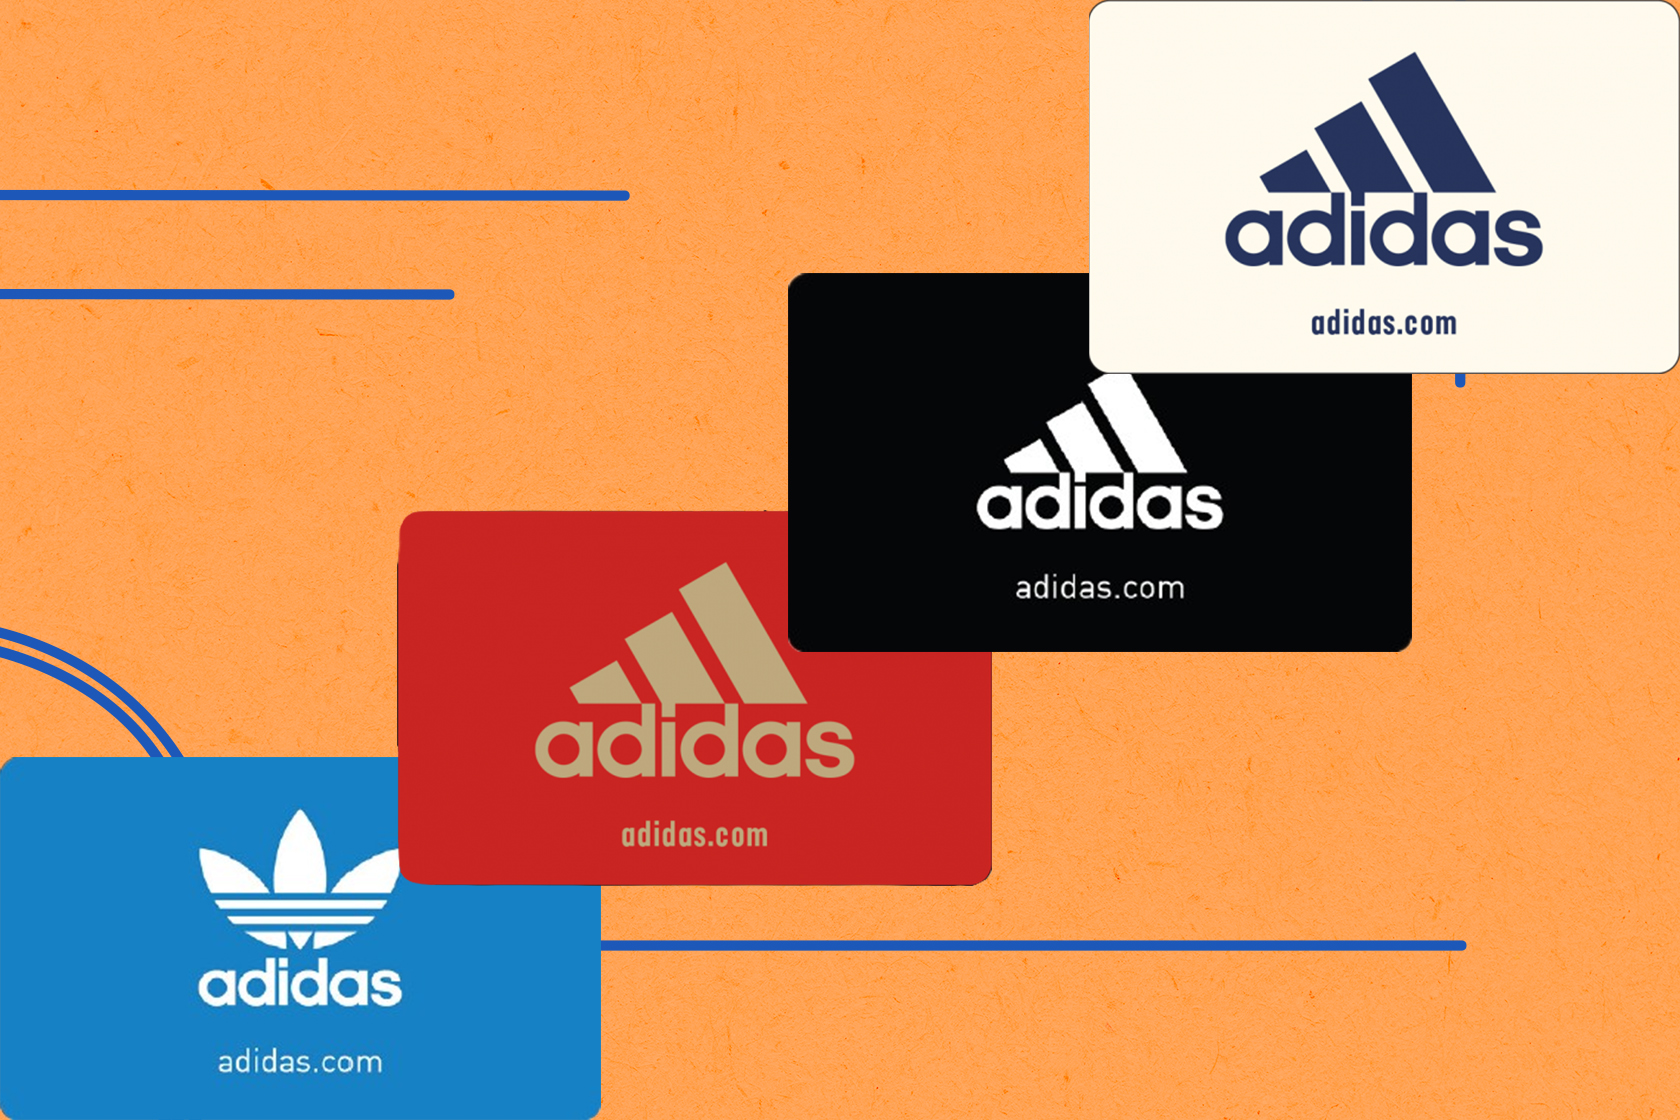 Stap nood badminton Get a free $20 credit when you buy a $100 Adidas gift card today